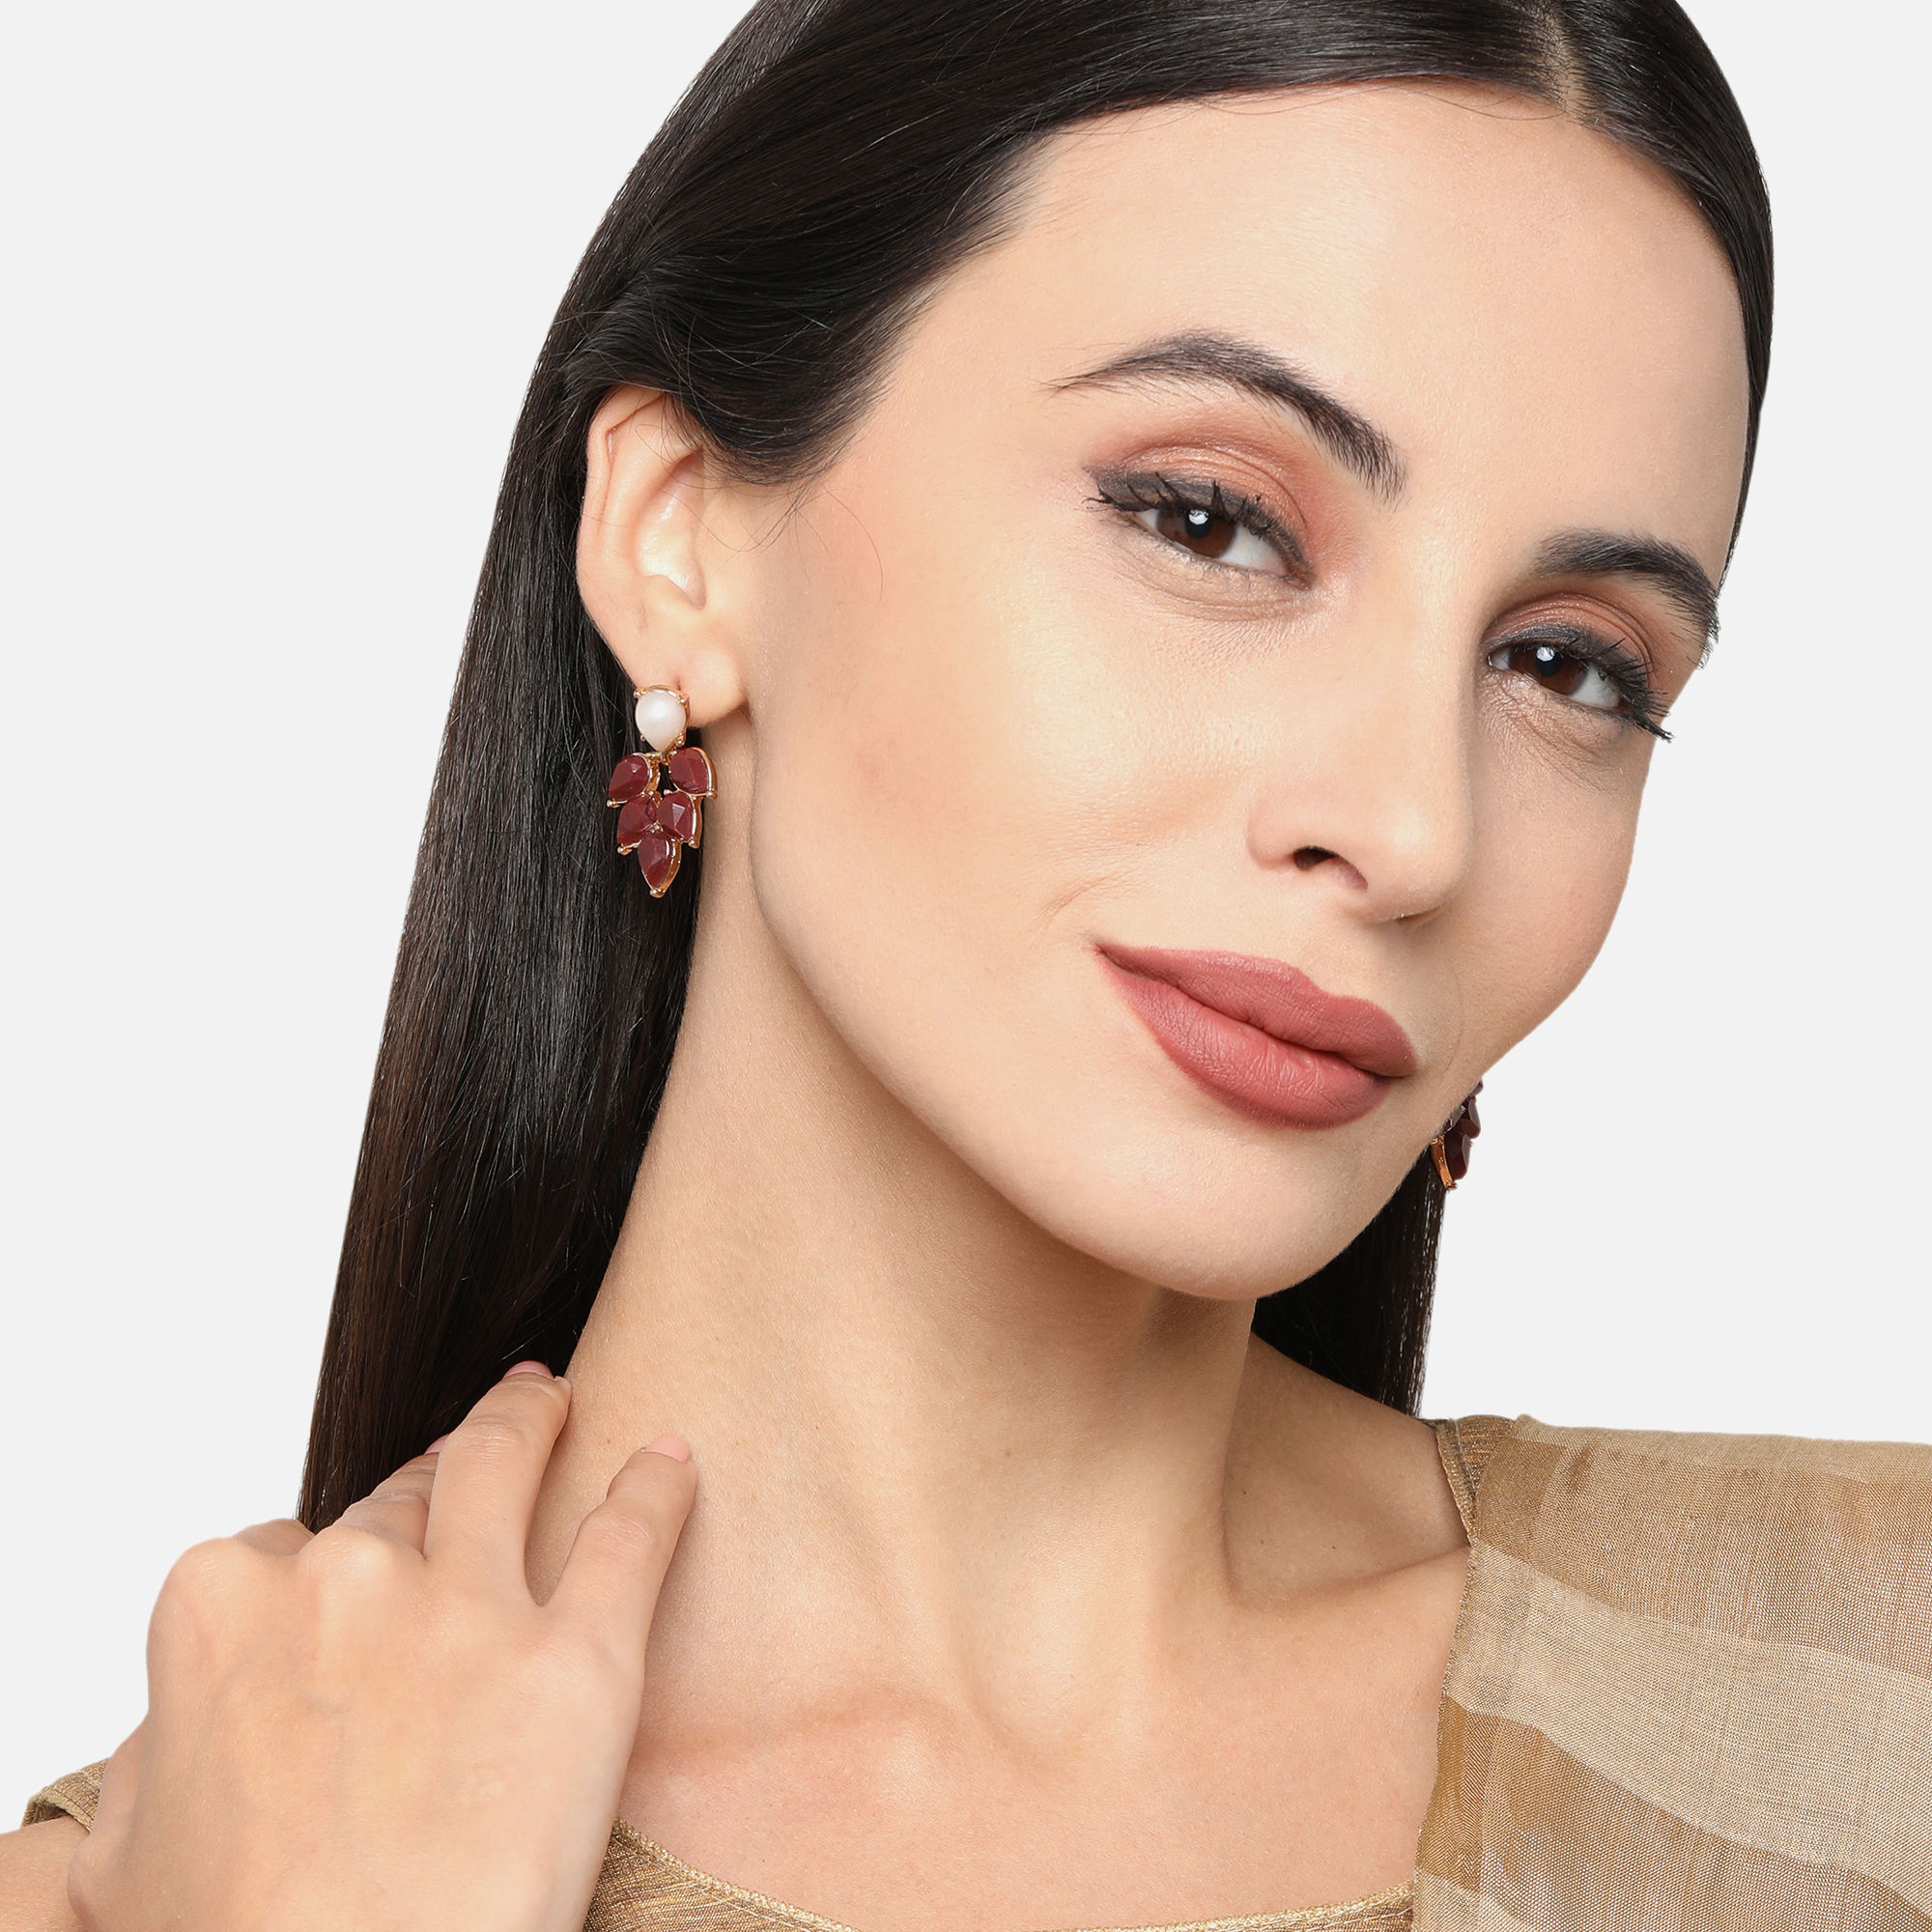 Shop for Accessorize  Earrings  Jewellery  Watches  Womens  online at  Grattan